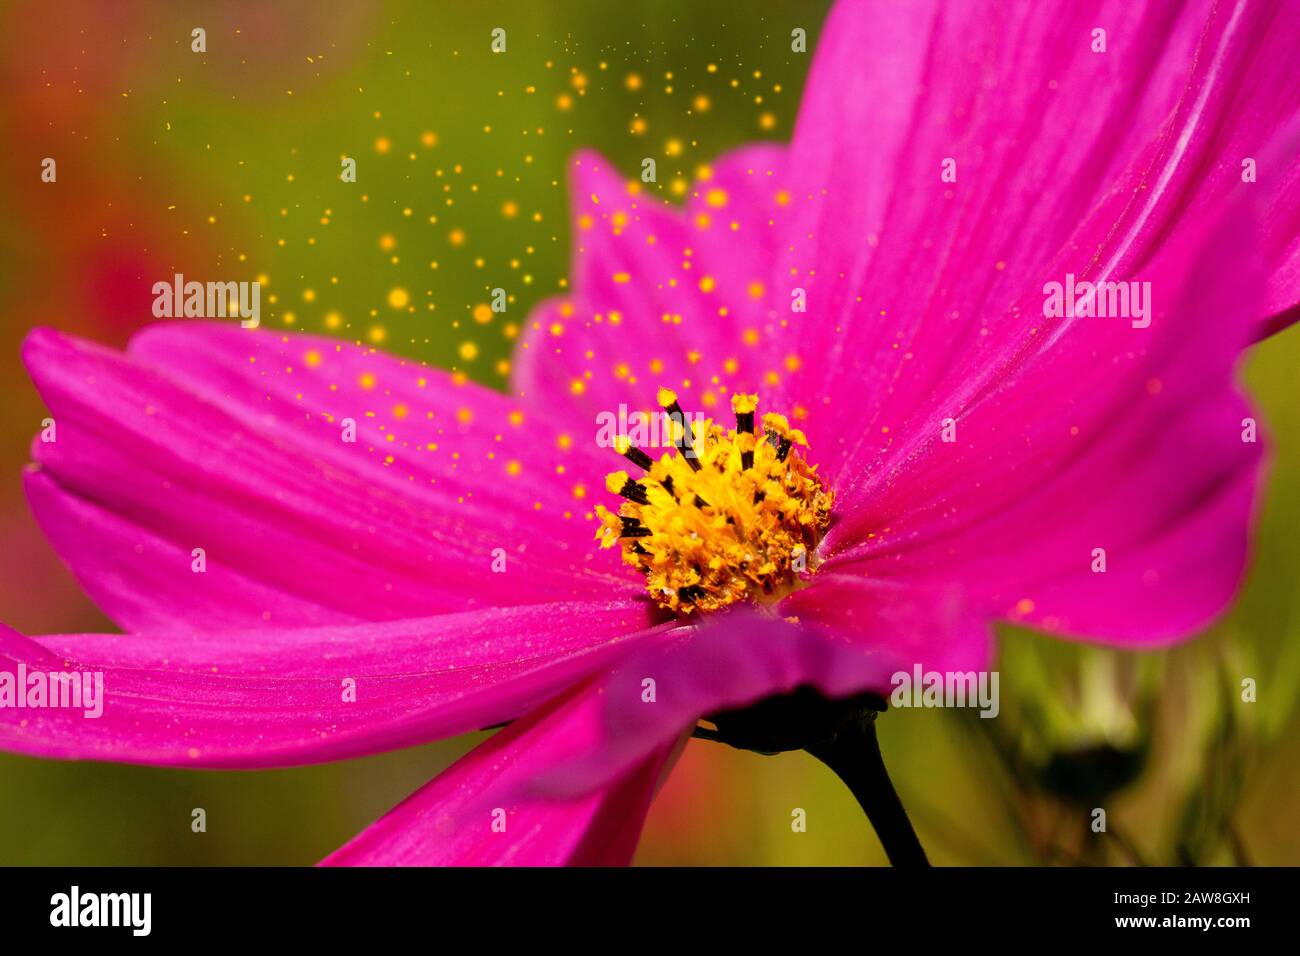 Pollen from a Pink Cosmos flower Stock Photo